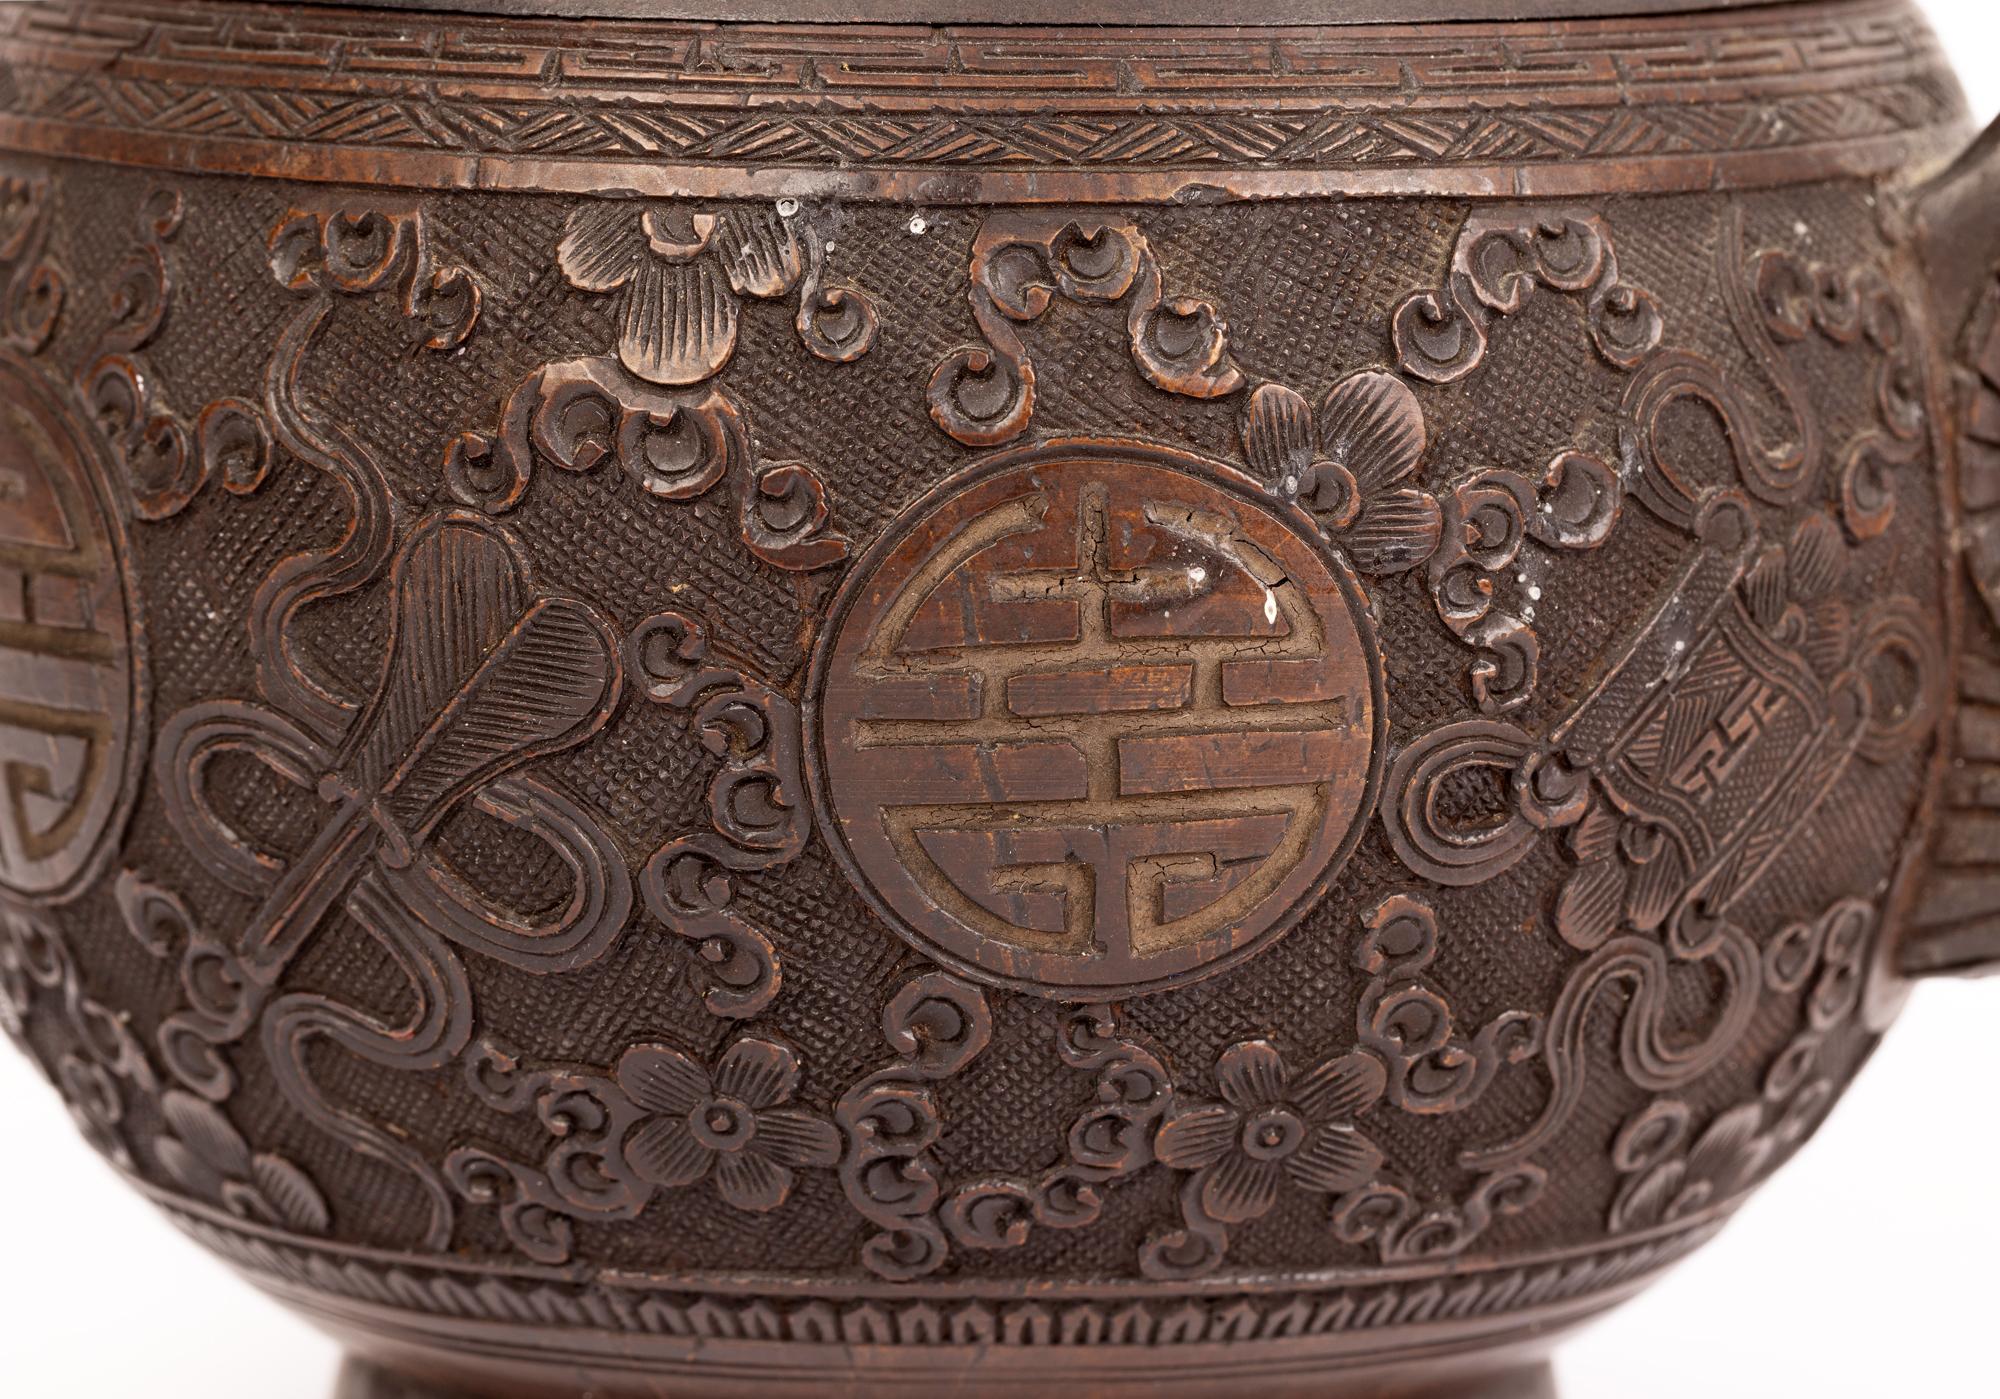 Metal Chinese Qing Carved Coconut Teapot with Shou Emblems & Precious Objects